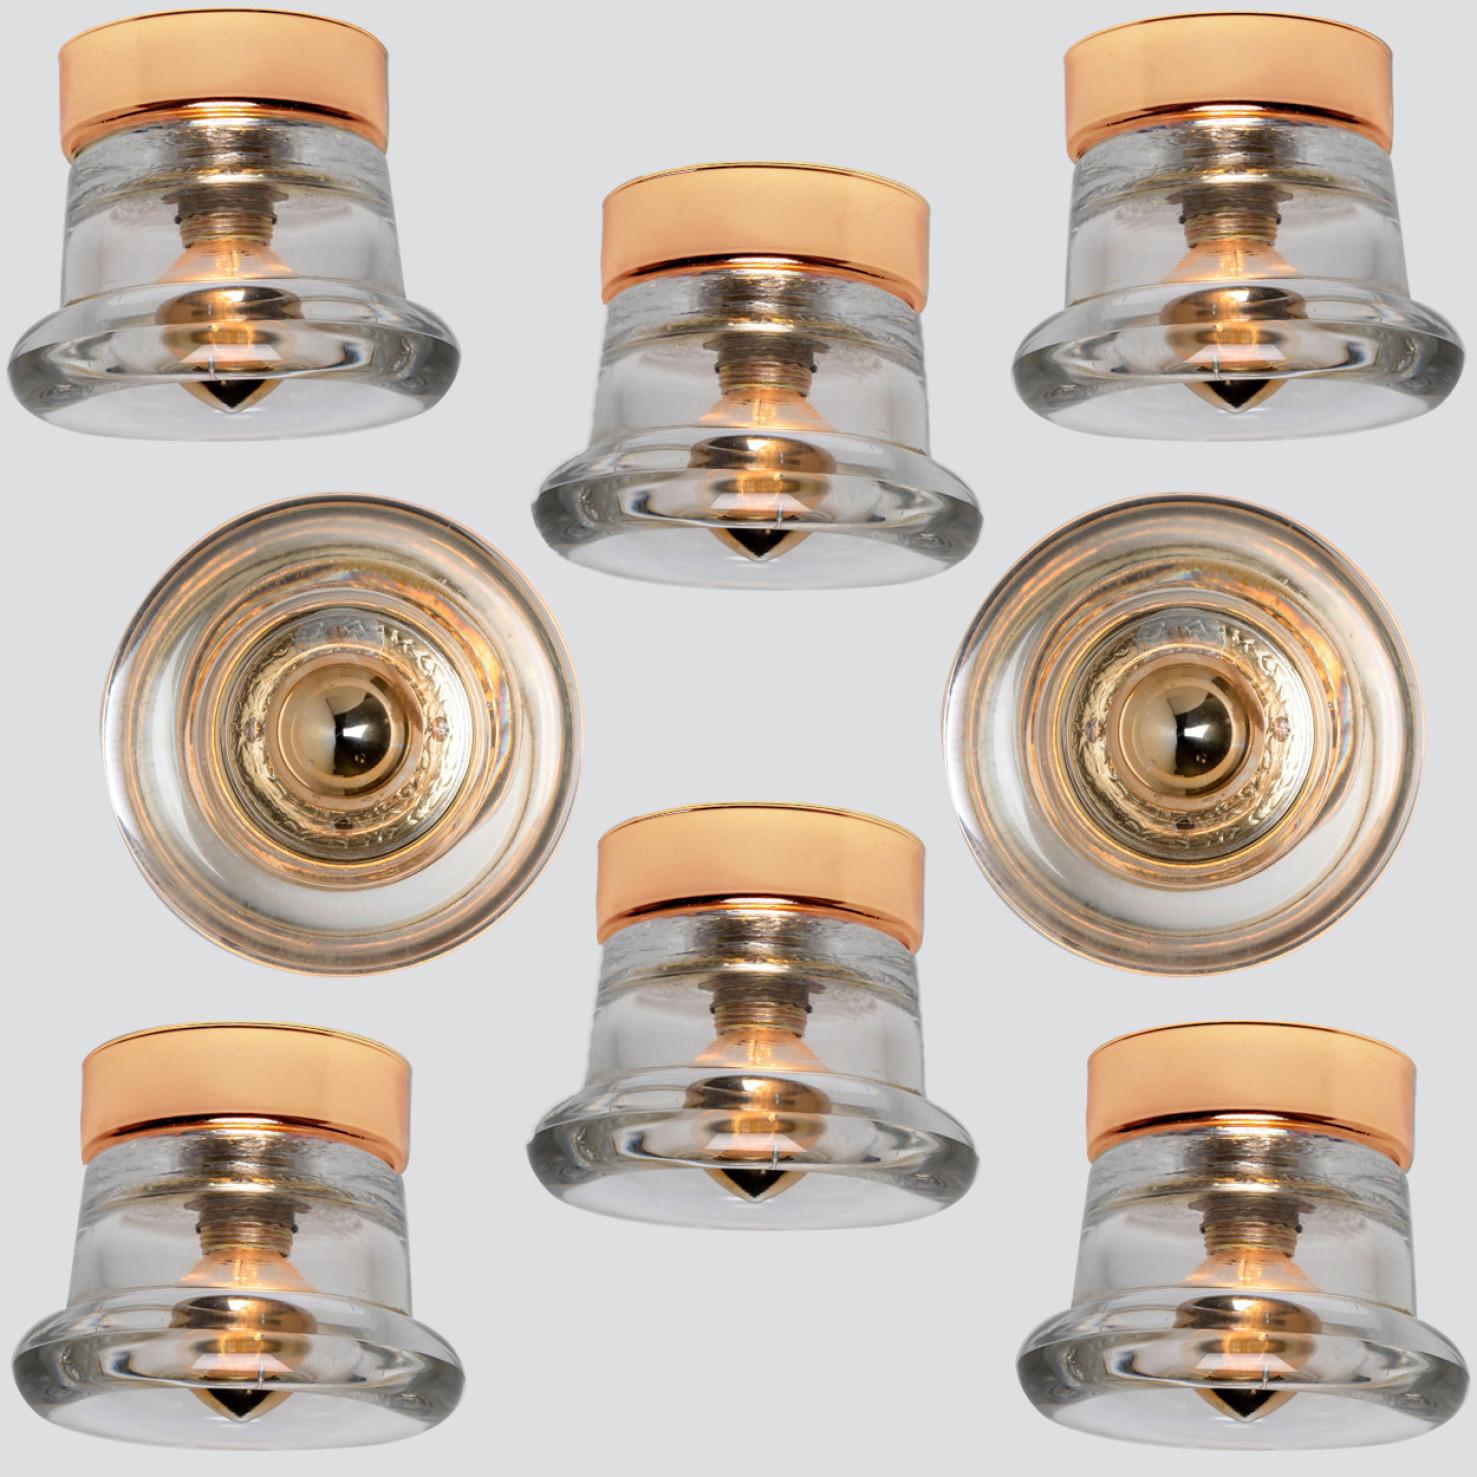 1 of the 8 original glass wall sconces or flush mounts by Cosack Leuchten. This light was designed and produced by Cosack Leuchten, one of the premium light producers is the 1960s and 1970s in Germany, Europe. The lights are made of thick round